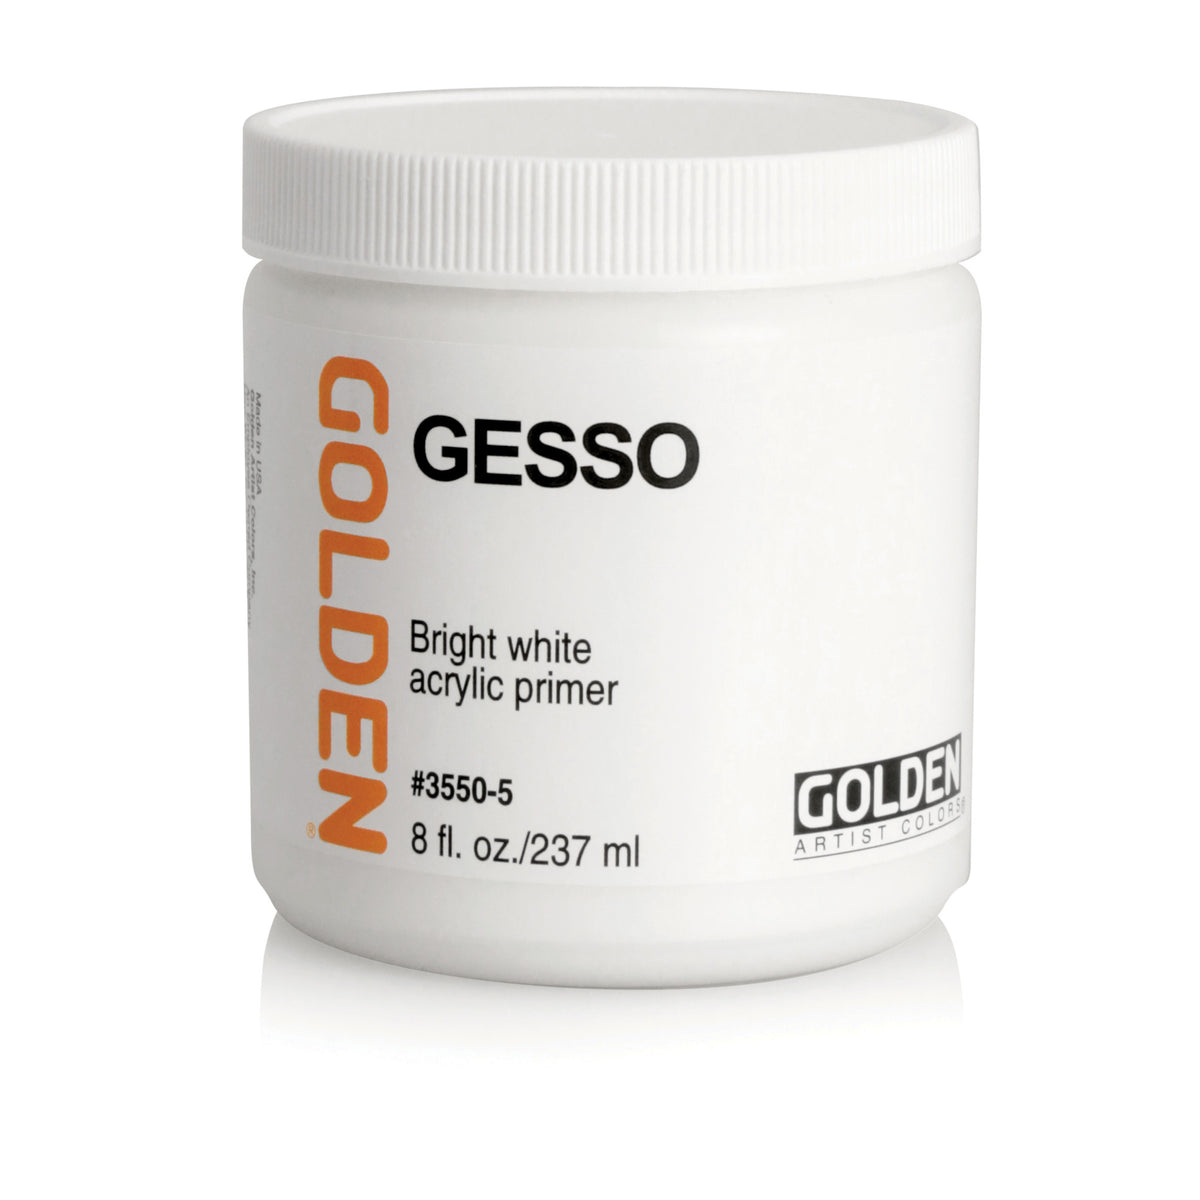 REVIEW: DecoArt Chalky Gesso